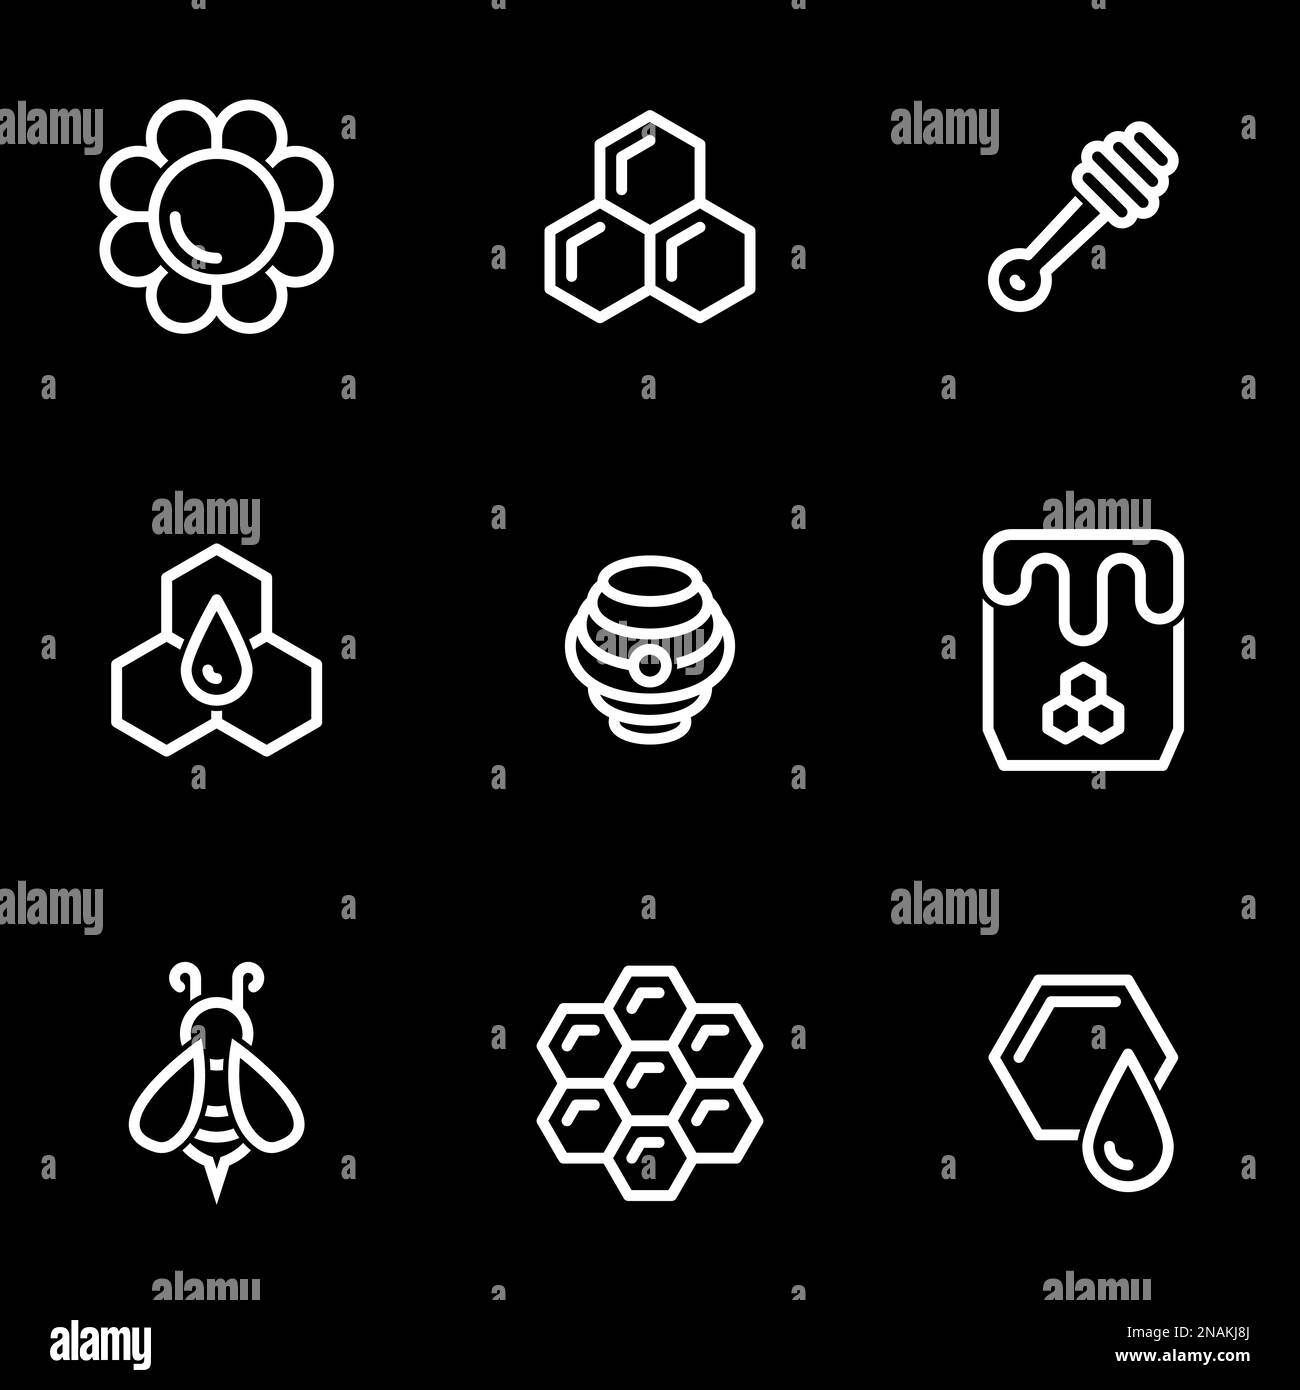 Set of simple icons on a theme Bee, honey, sweet, vector, set. Black background Stock Vector